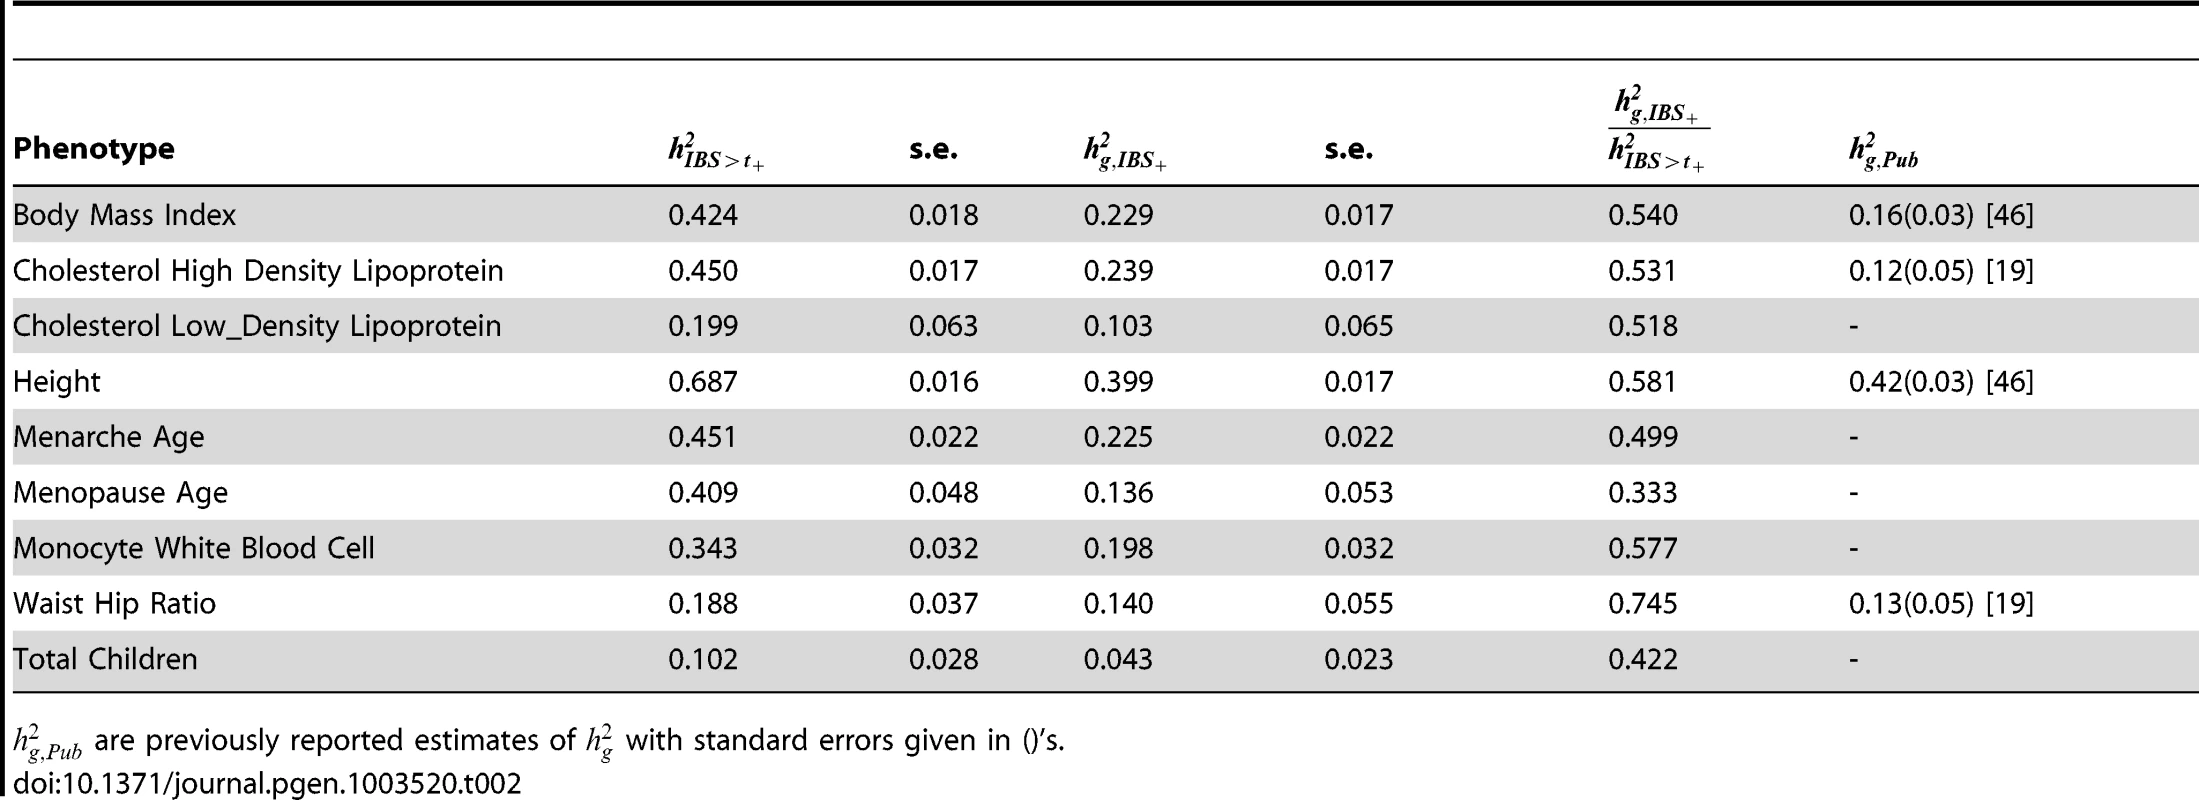 Heritability estimated from thresholding IBS () and heritability explained by genotyped SNPs ().